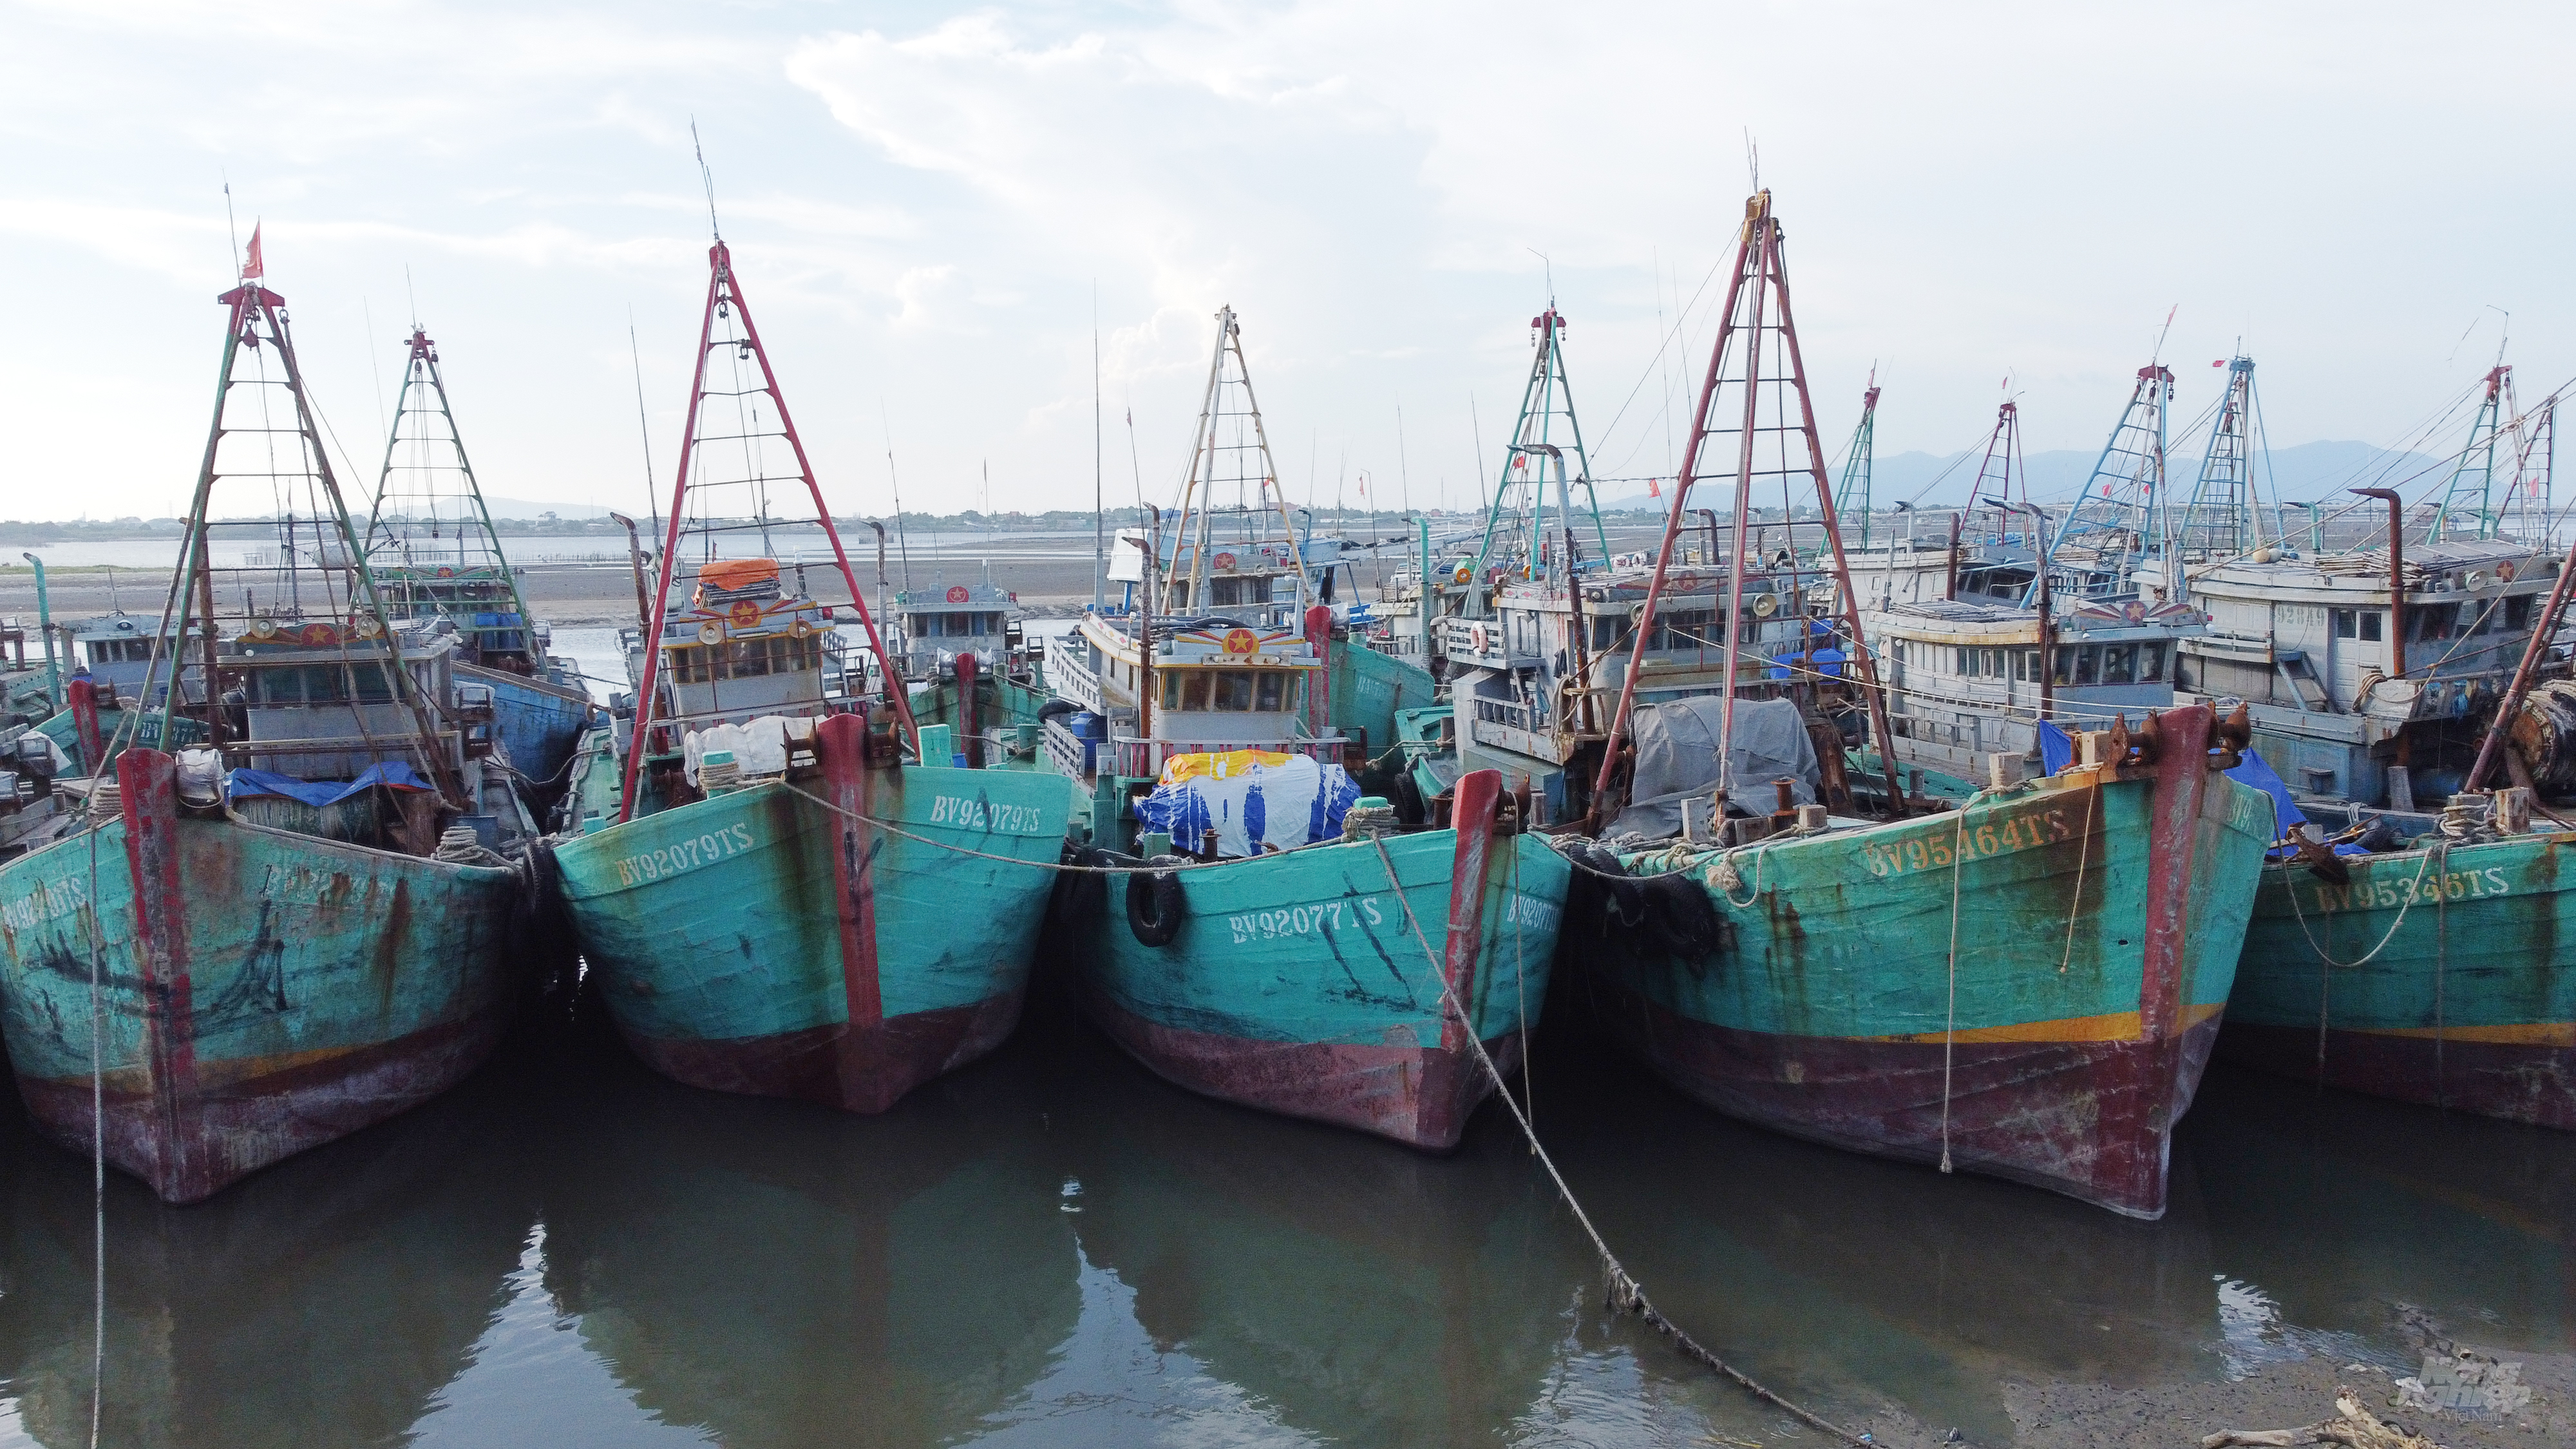  Many fishing vessels in the province are still waiting to complete the registration procedures to go fishing after many days of social distancing. Photo: Tran Trung.